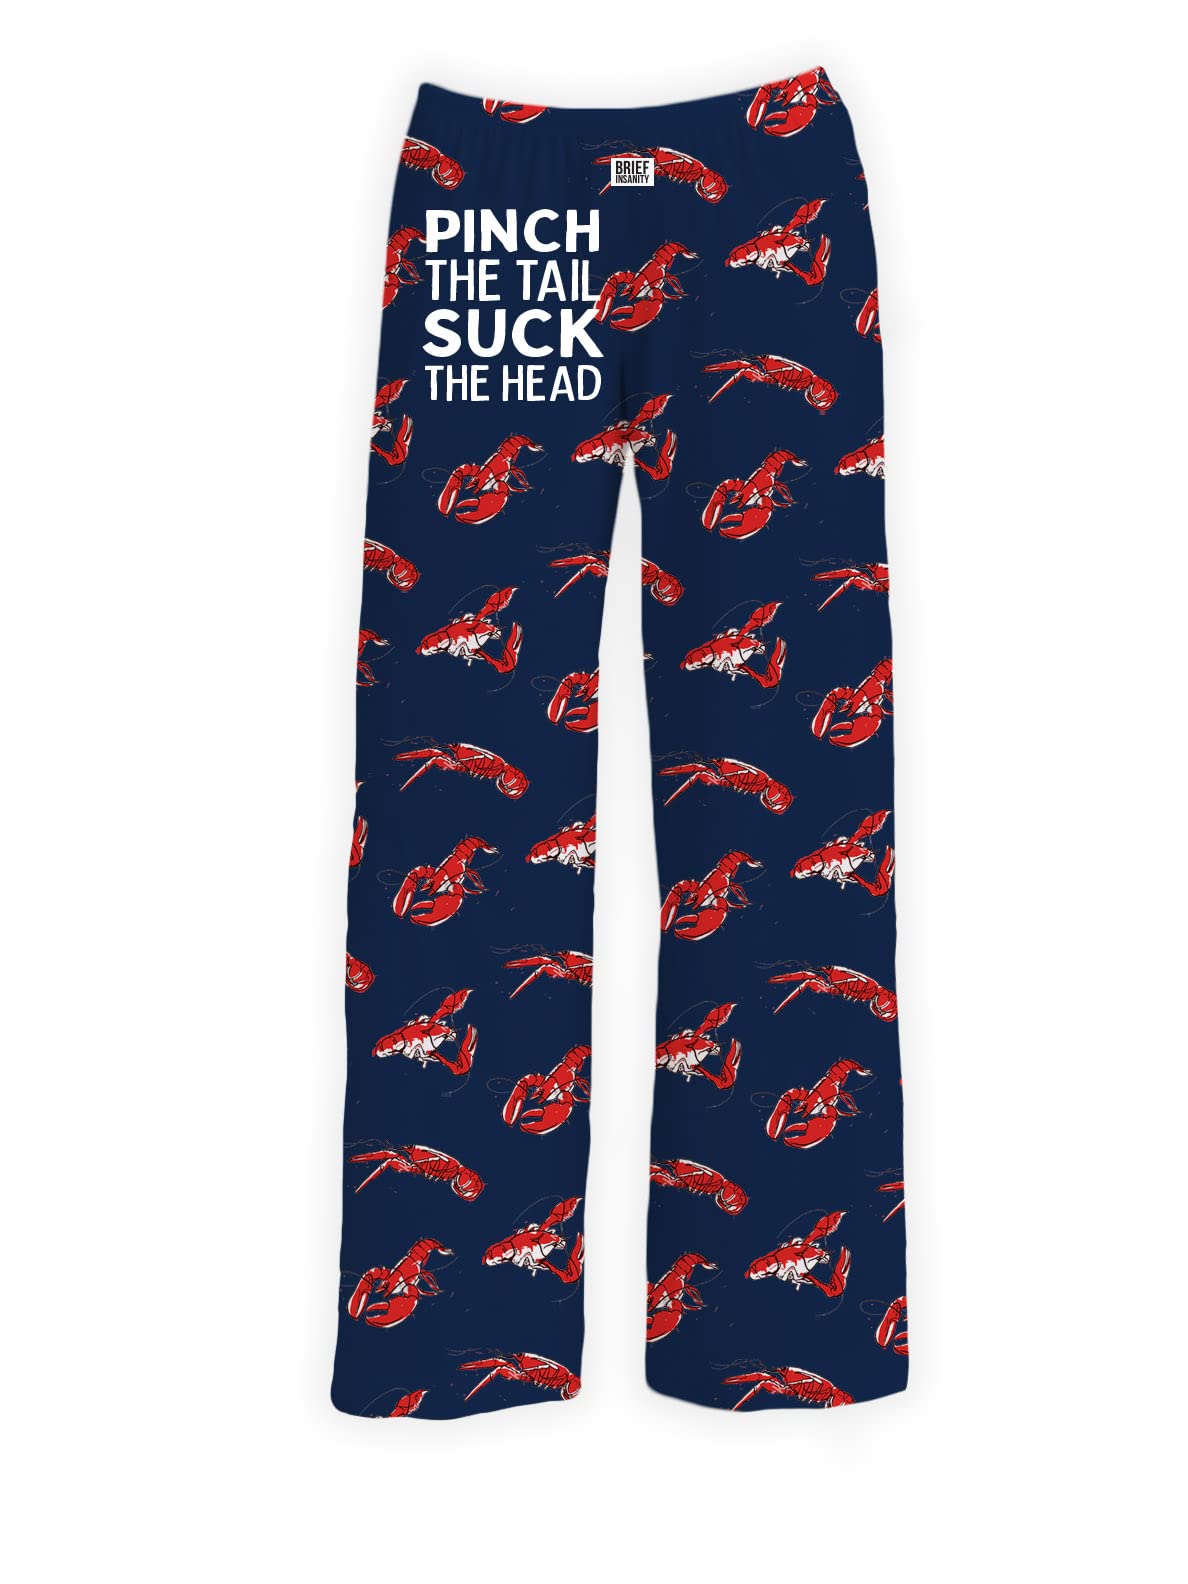 BRIEF INSANITY Lobster "Pinch the Tail, Suck the Head" Pajama Pants